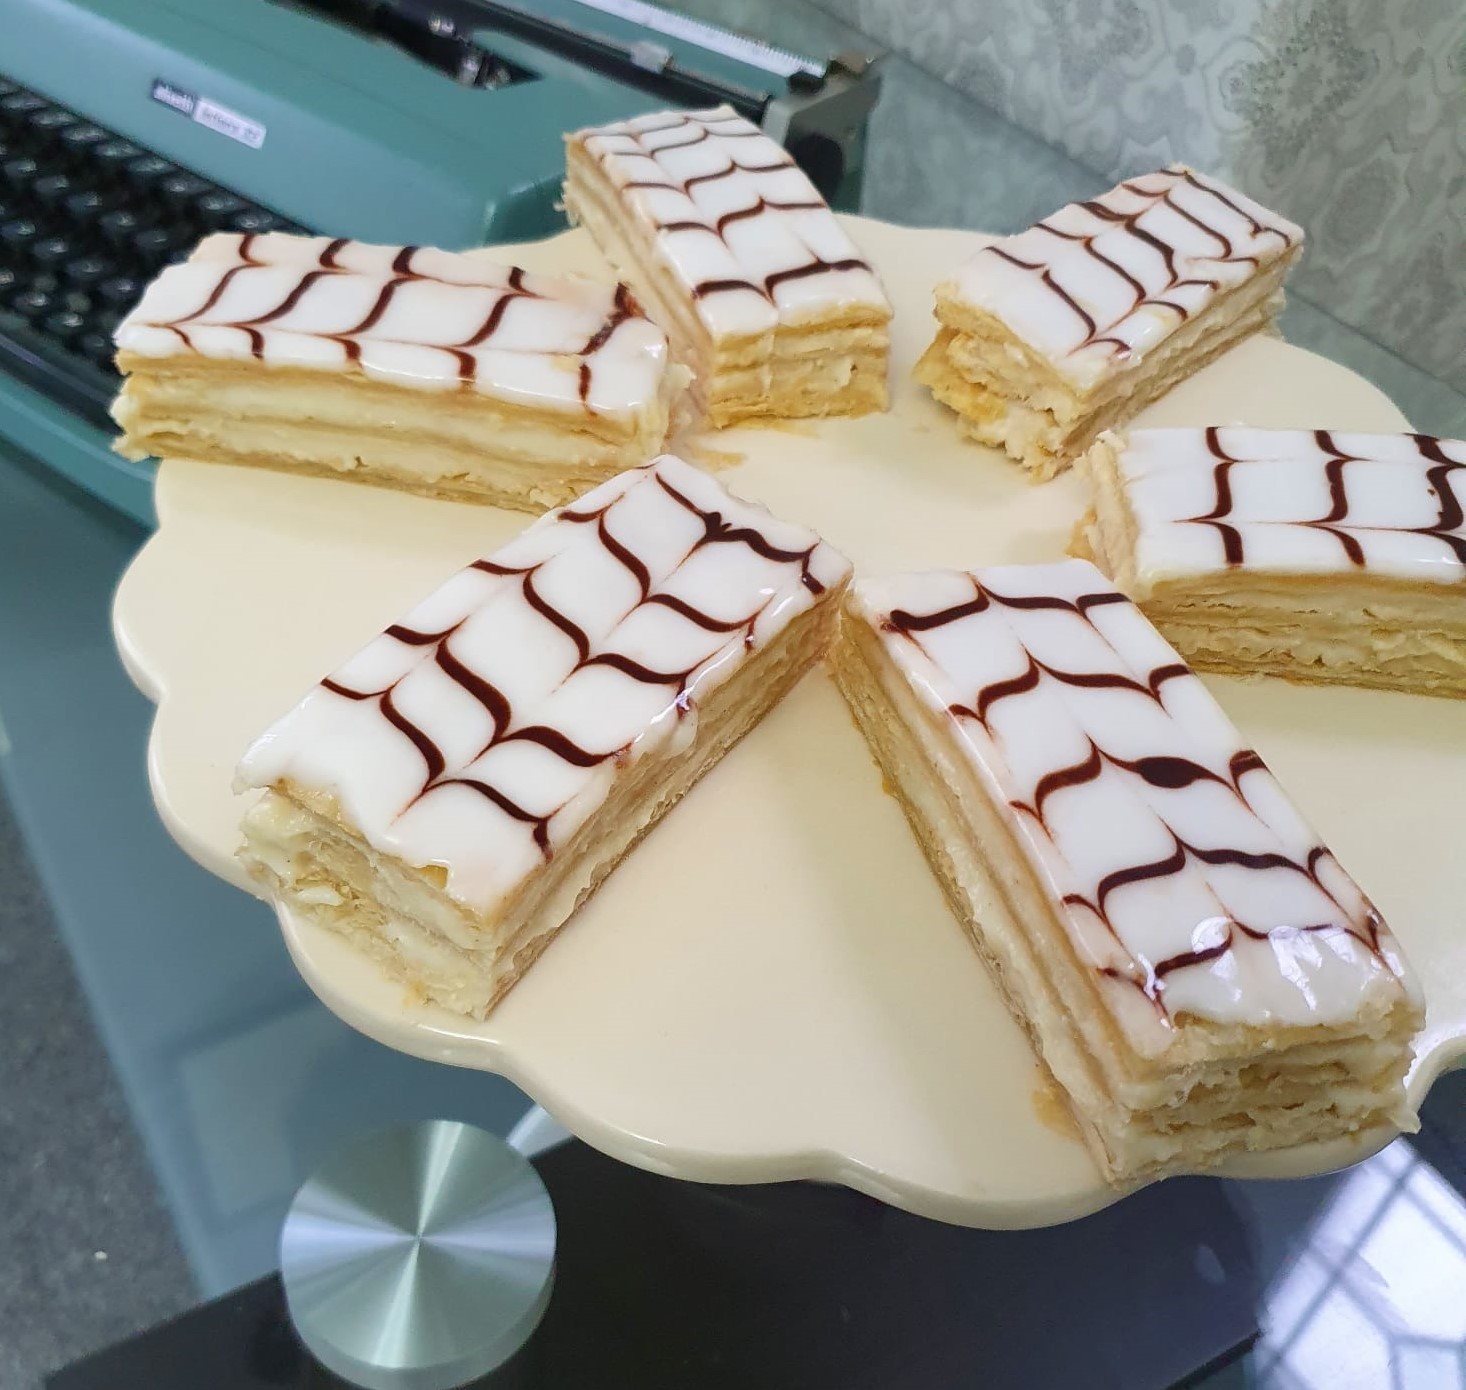 Maks finished millefeuille